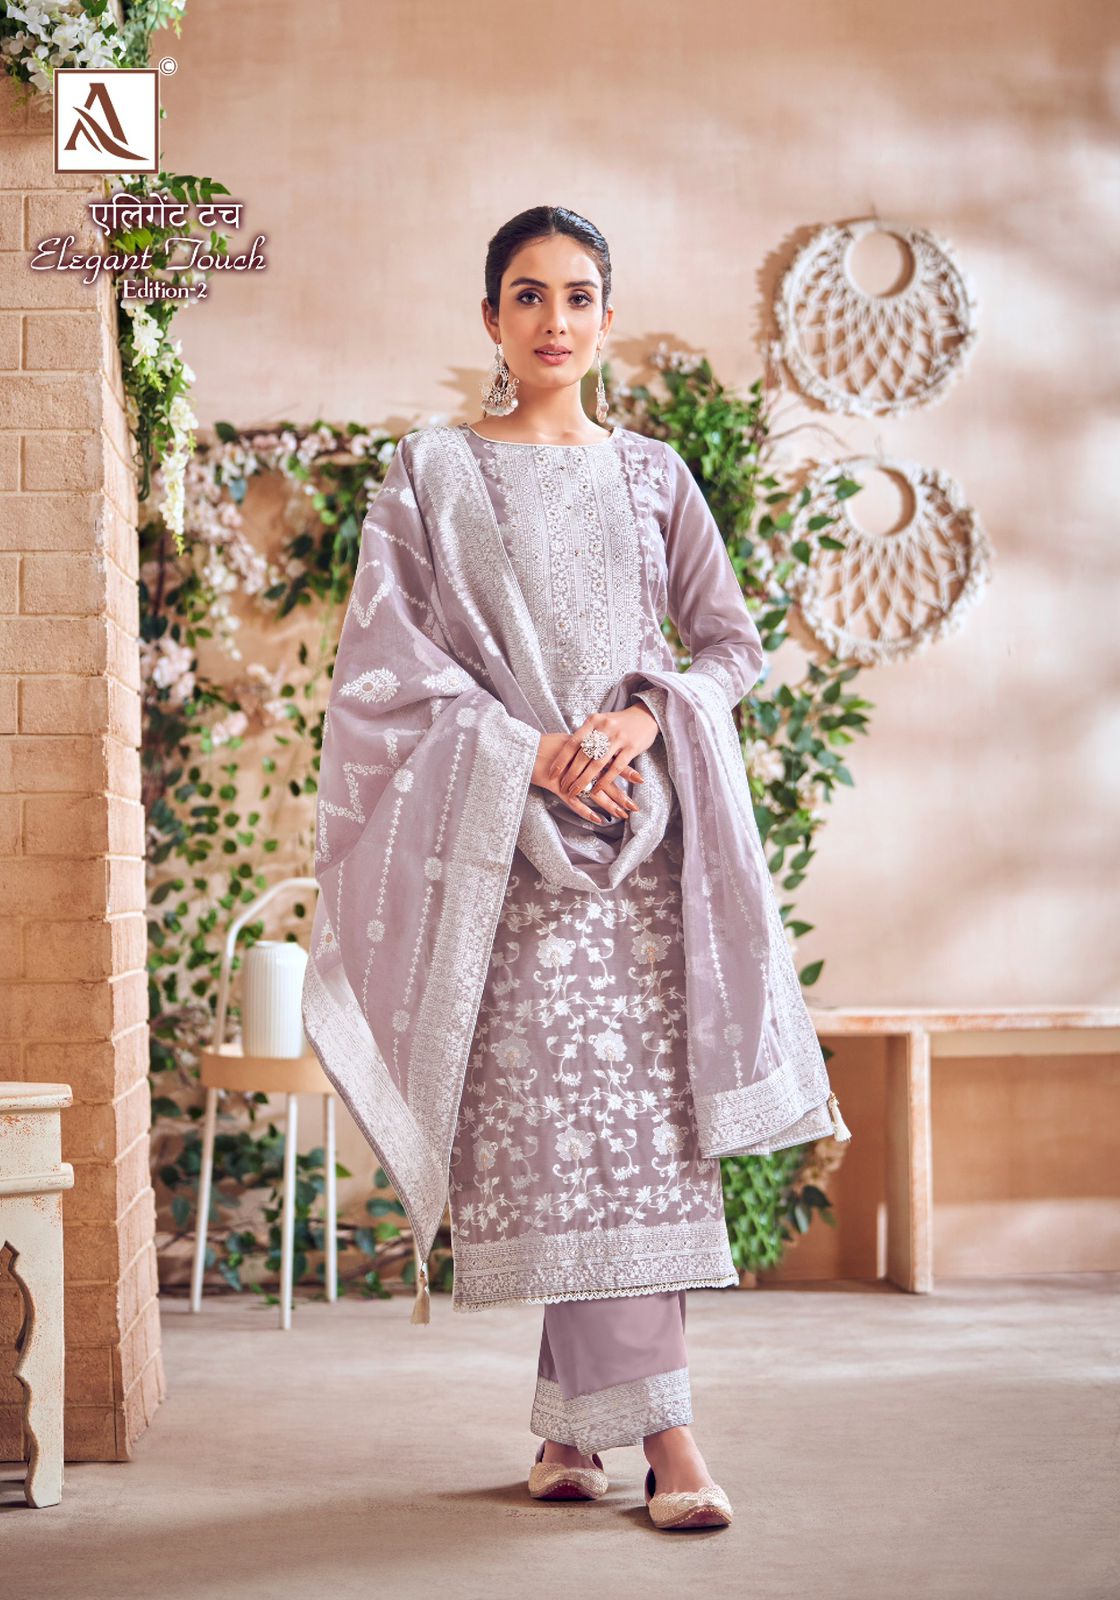 Alok Elegant Touch Vol 2 collection 1